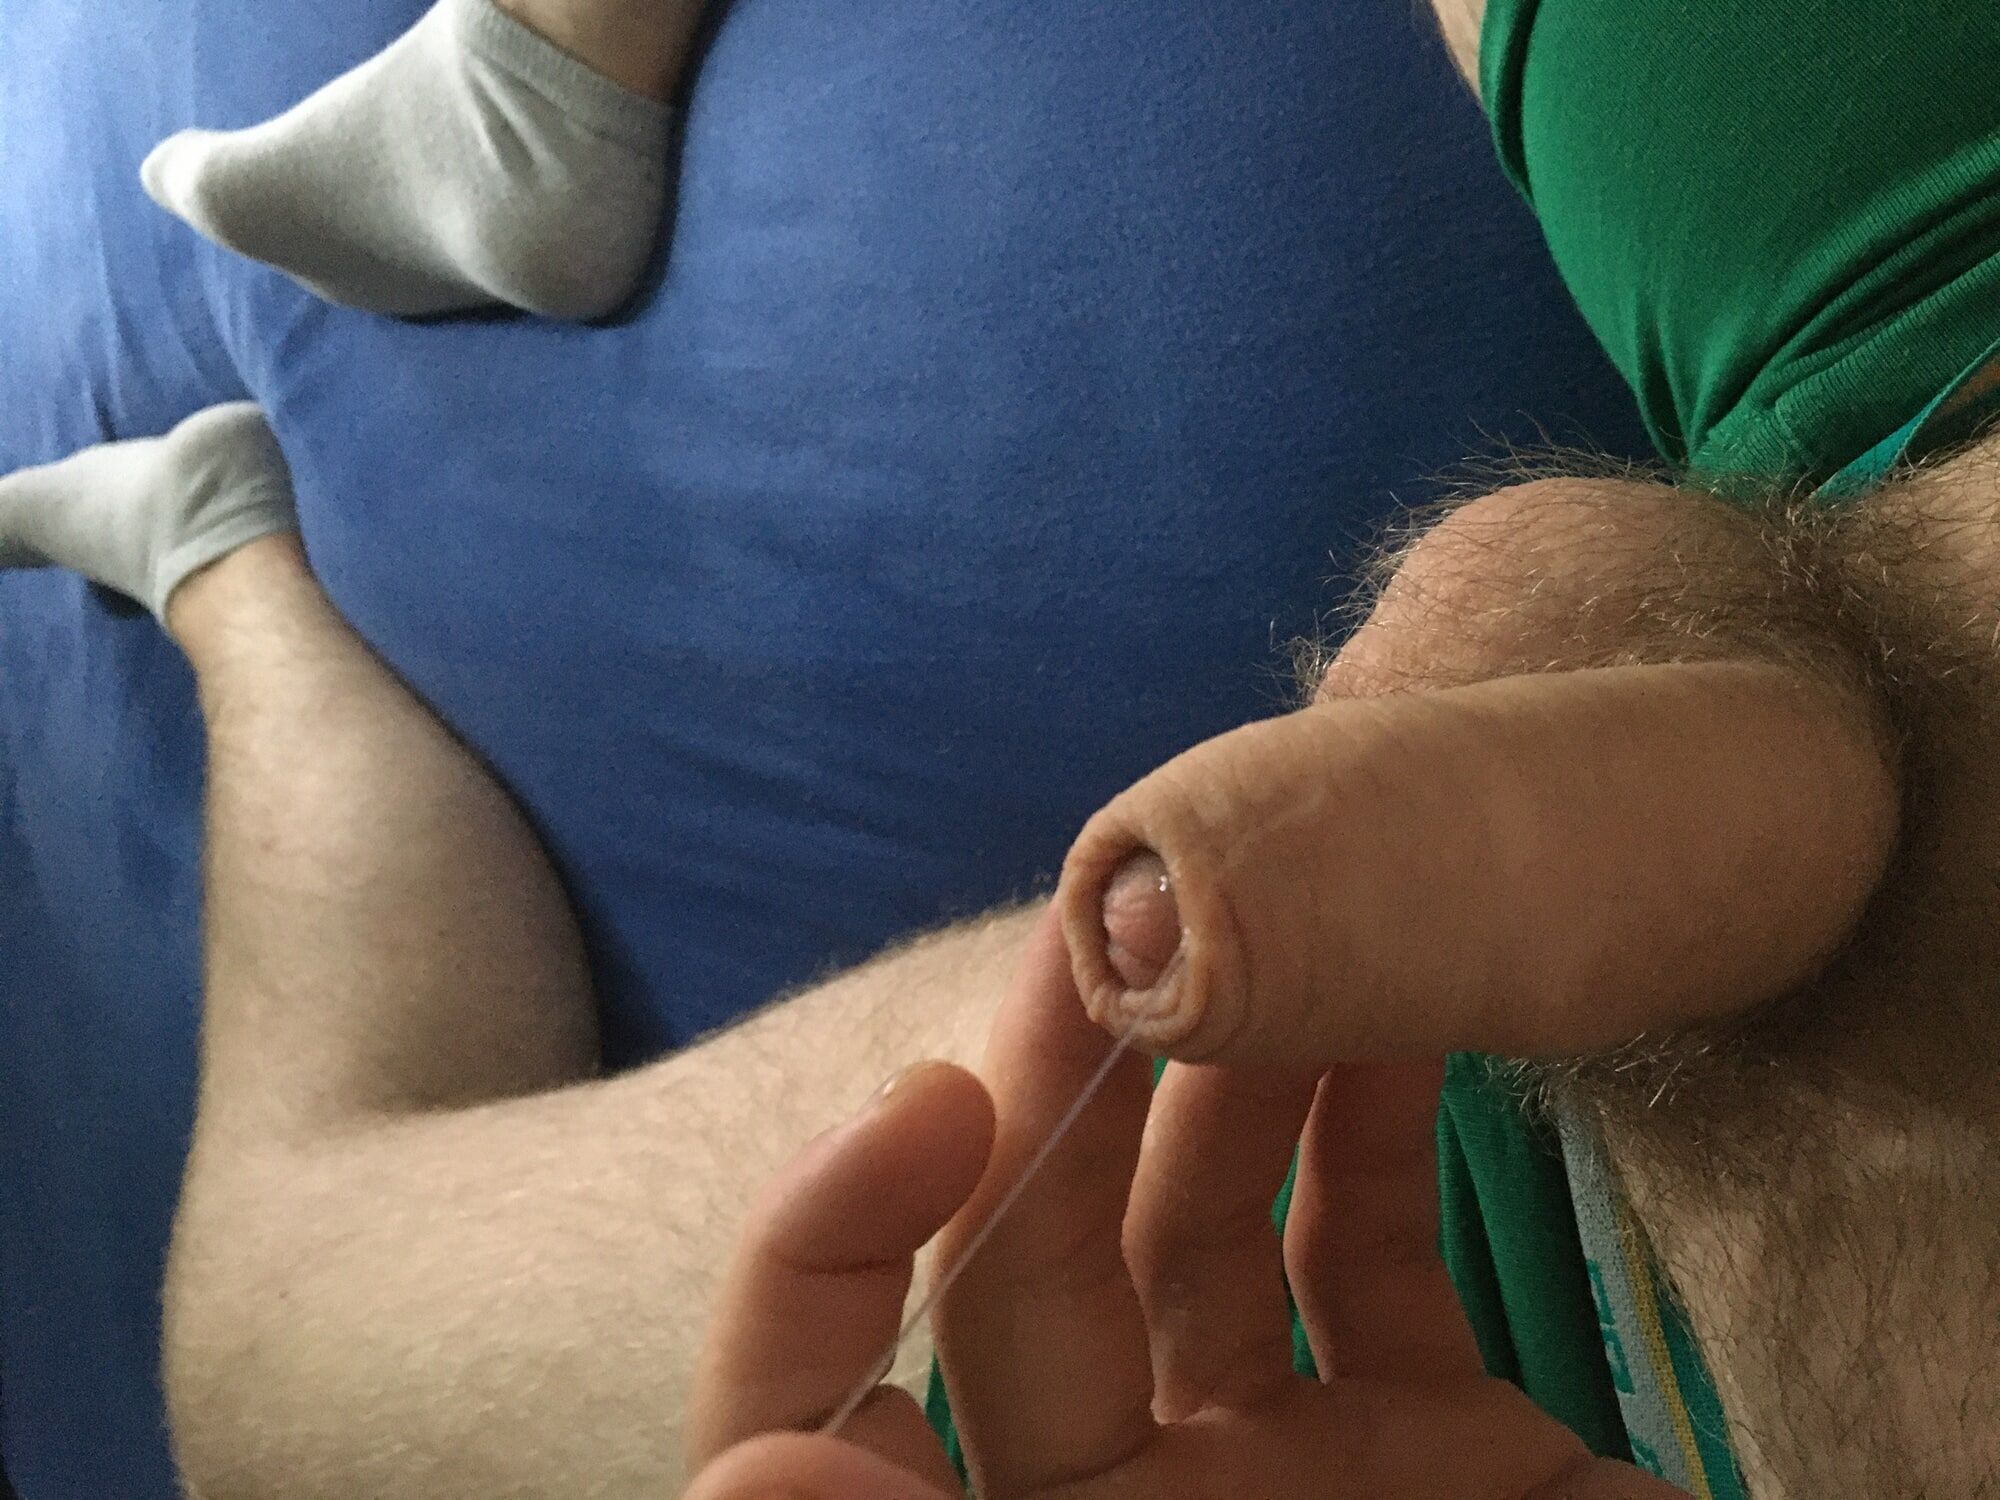 Hairy Dick And Balls Cockhead Foreskin Play With Pre- Cum #11